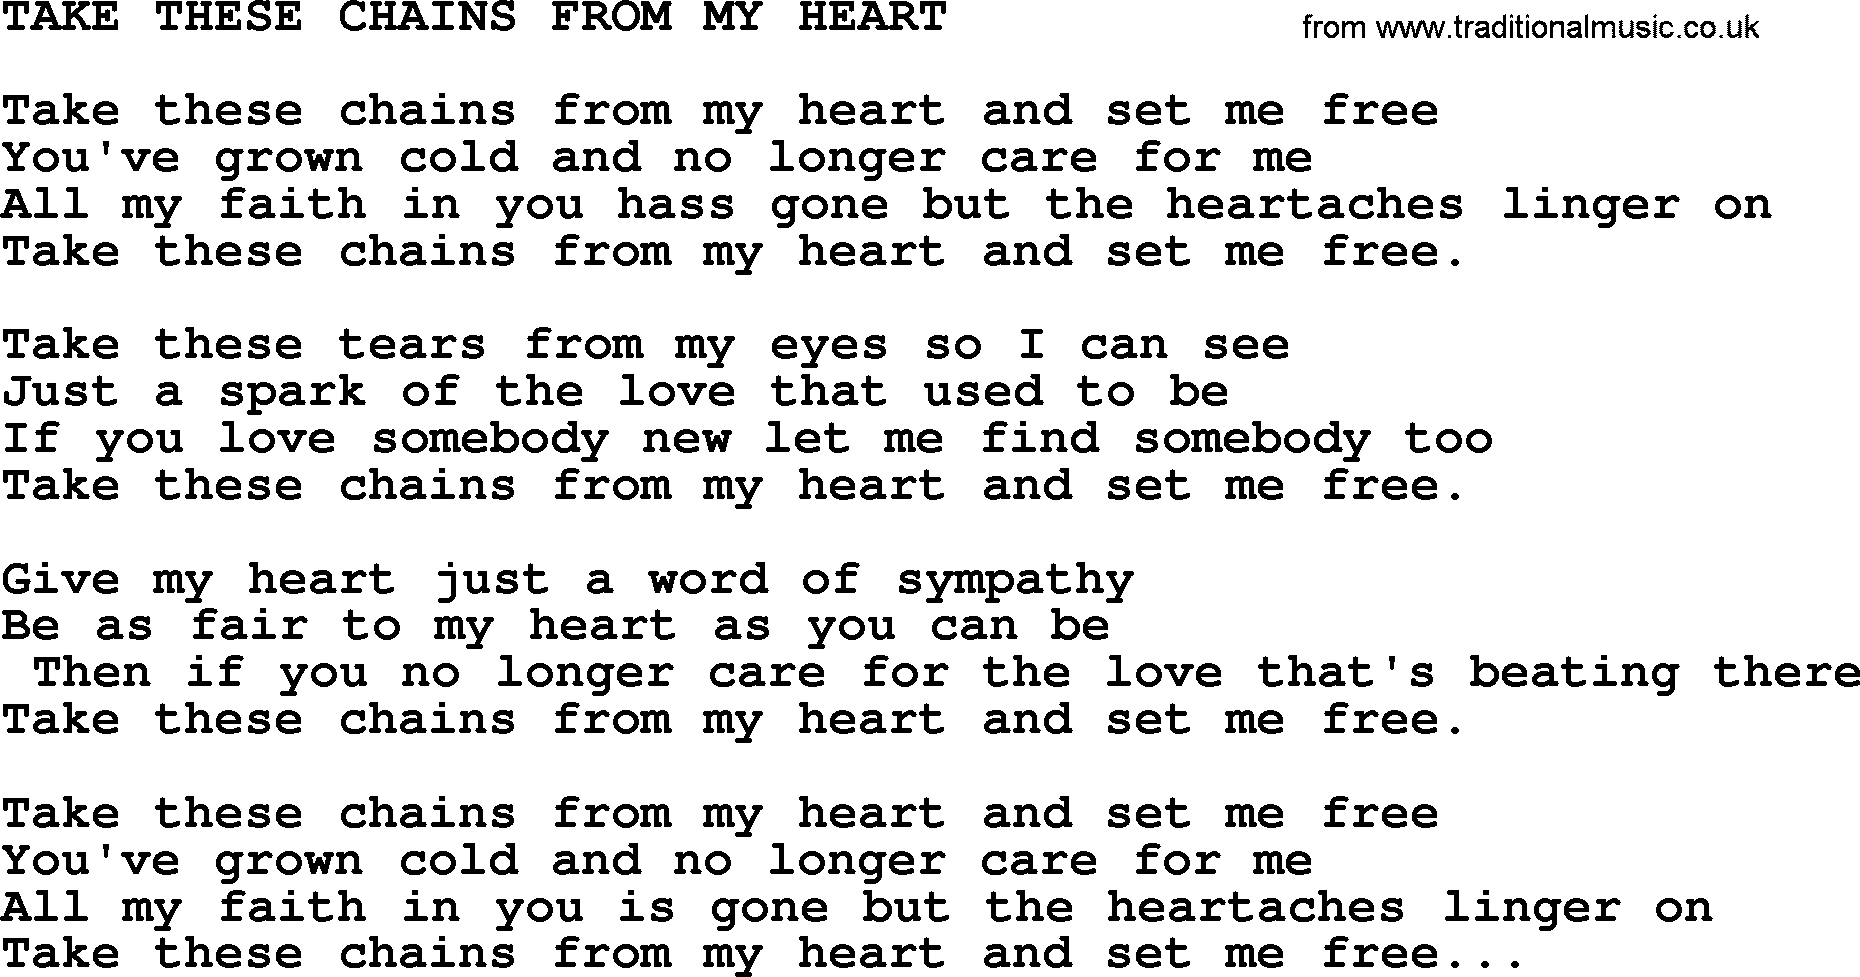 Merle Haggard song: Take These Chains From My Heart, lyrics.